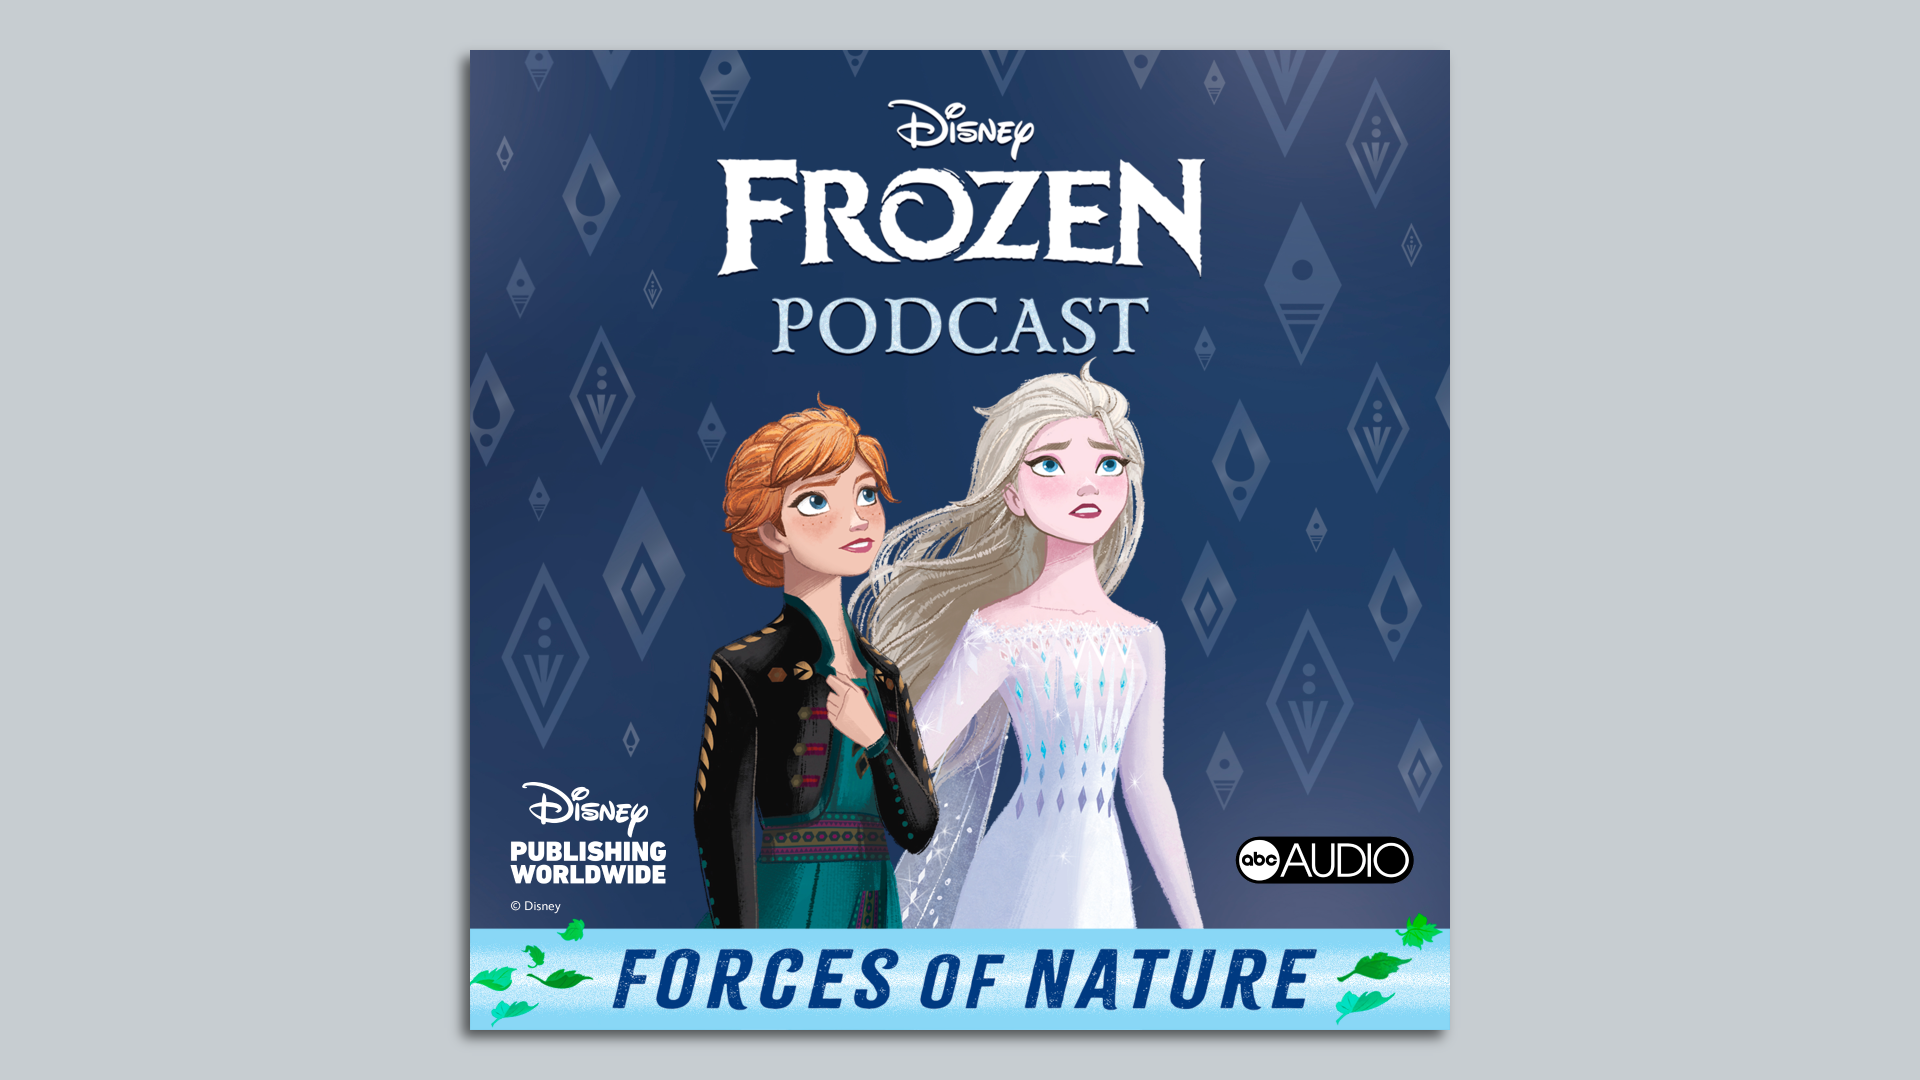 The tile cover for "Disney Frozen Podcast: Forces of Nature" with Anna and Elsa standing side by side. Anna, on the left, looks inspired and has her hand on her chest while Elsa, on the right, looks worried. The image also says Disney Publishing Worldwide and ABC Audio